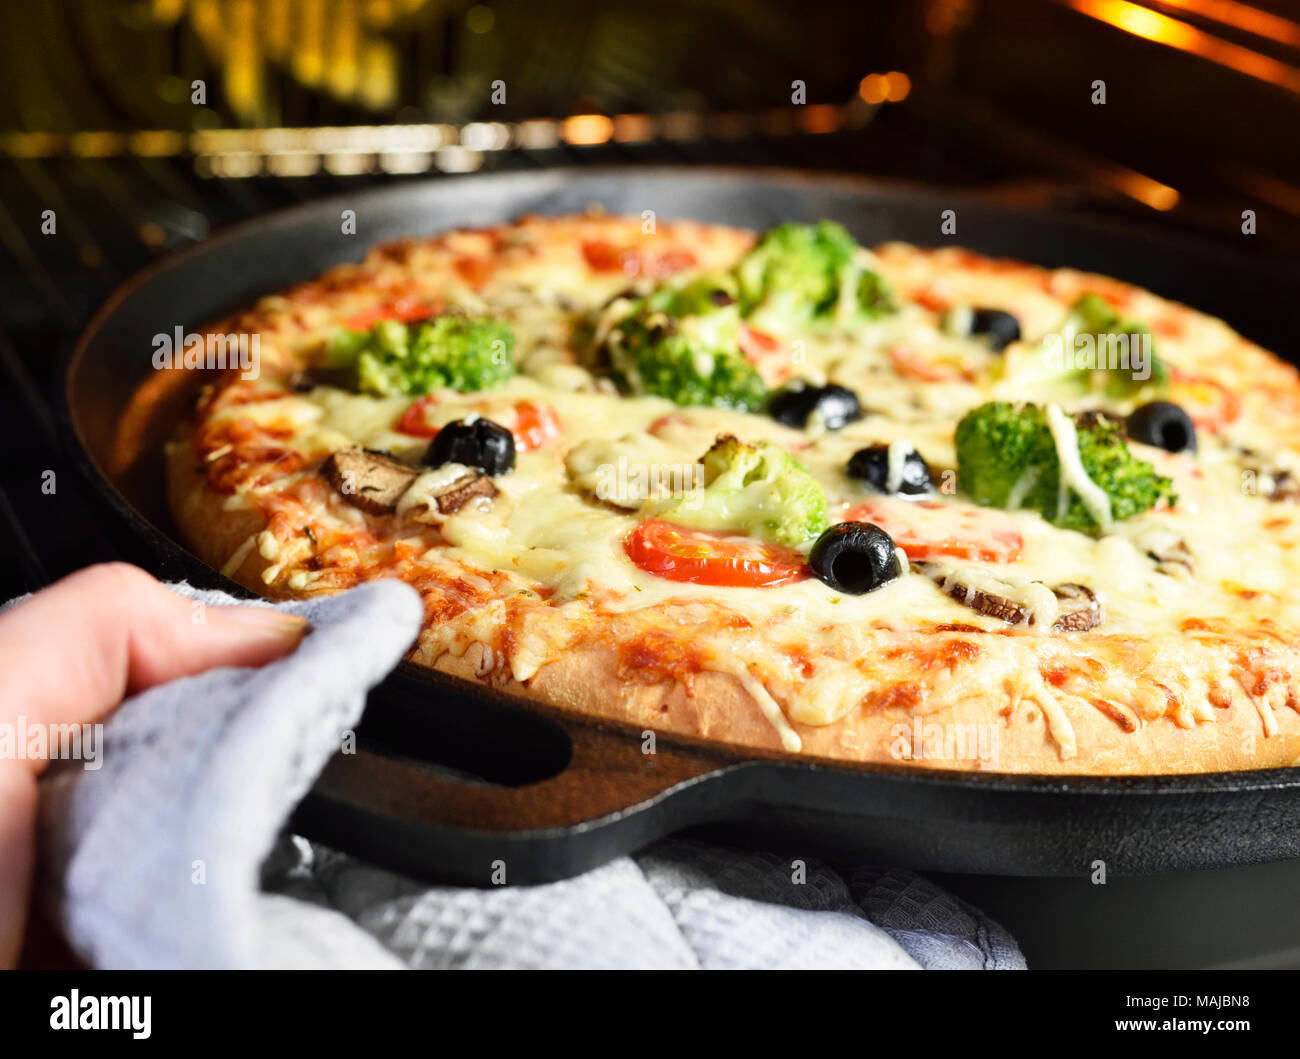 Homemade pizza. Vegetarian pizza in a pizza pan,vegetable pizza with broccoli, mushrooms, tomatoes and olives. Pizza baking scene. Stock Photo